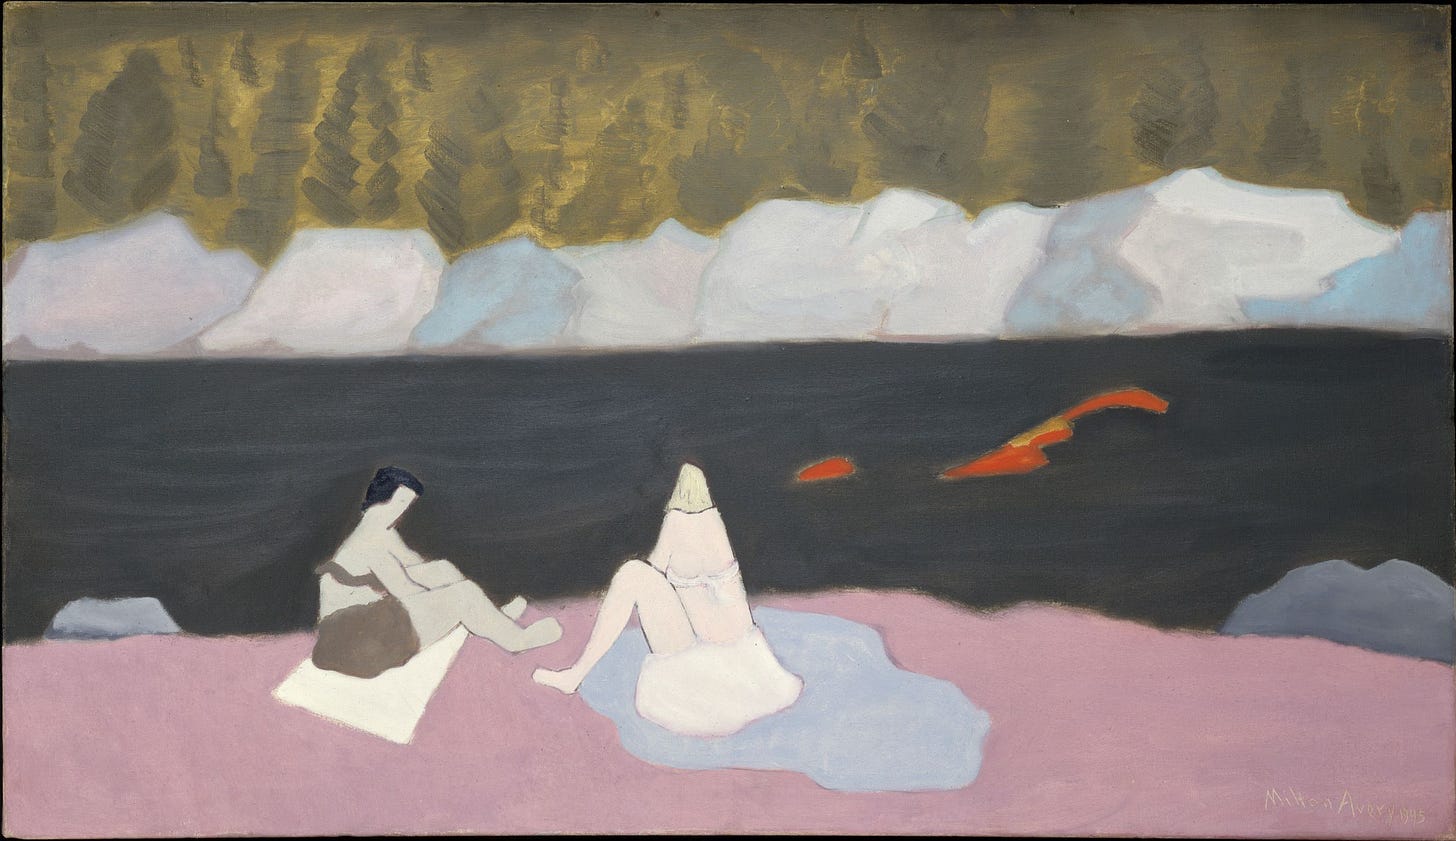 Milton Avery (American, 1885-1965). Swimmers and Sunbathers, 1945. Oil on canvas, 28 x 48 1/4 in. The Metropolitan    Museum of Art, Gift of Mr. and Mrs. Roy R. Neuberger, 1951 (51.97). © 2019 The Milton Avery Trust / Artists Rights Society (ARS), New York. Image copyright © The Metropolitan Museum of Art. Image source: Art Resource, NY.